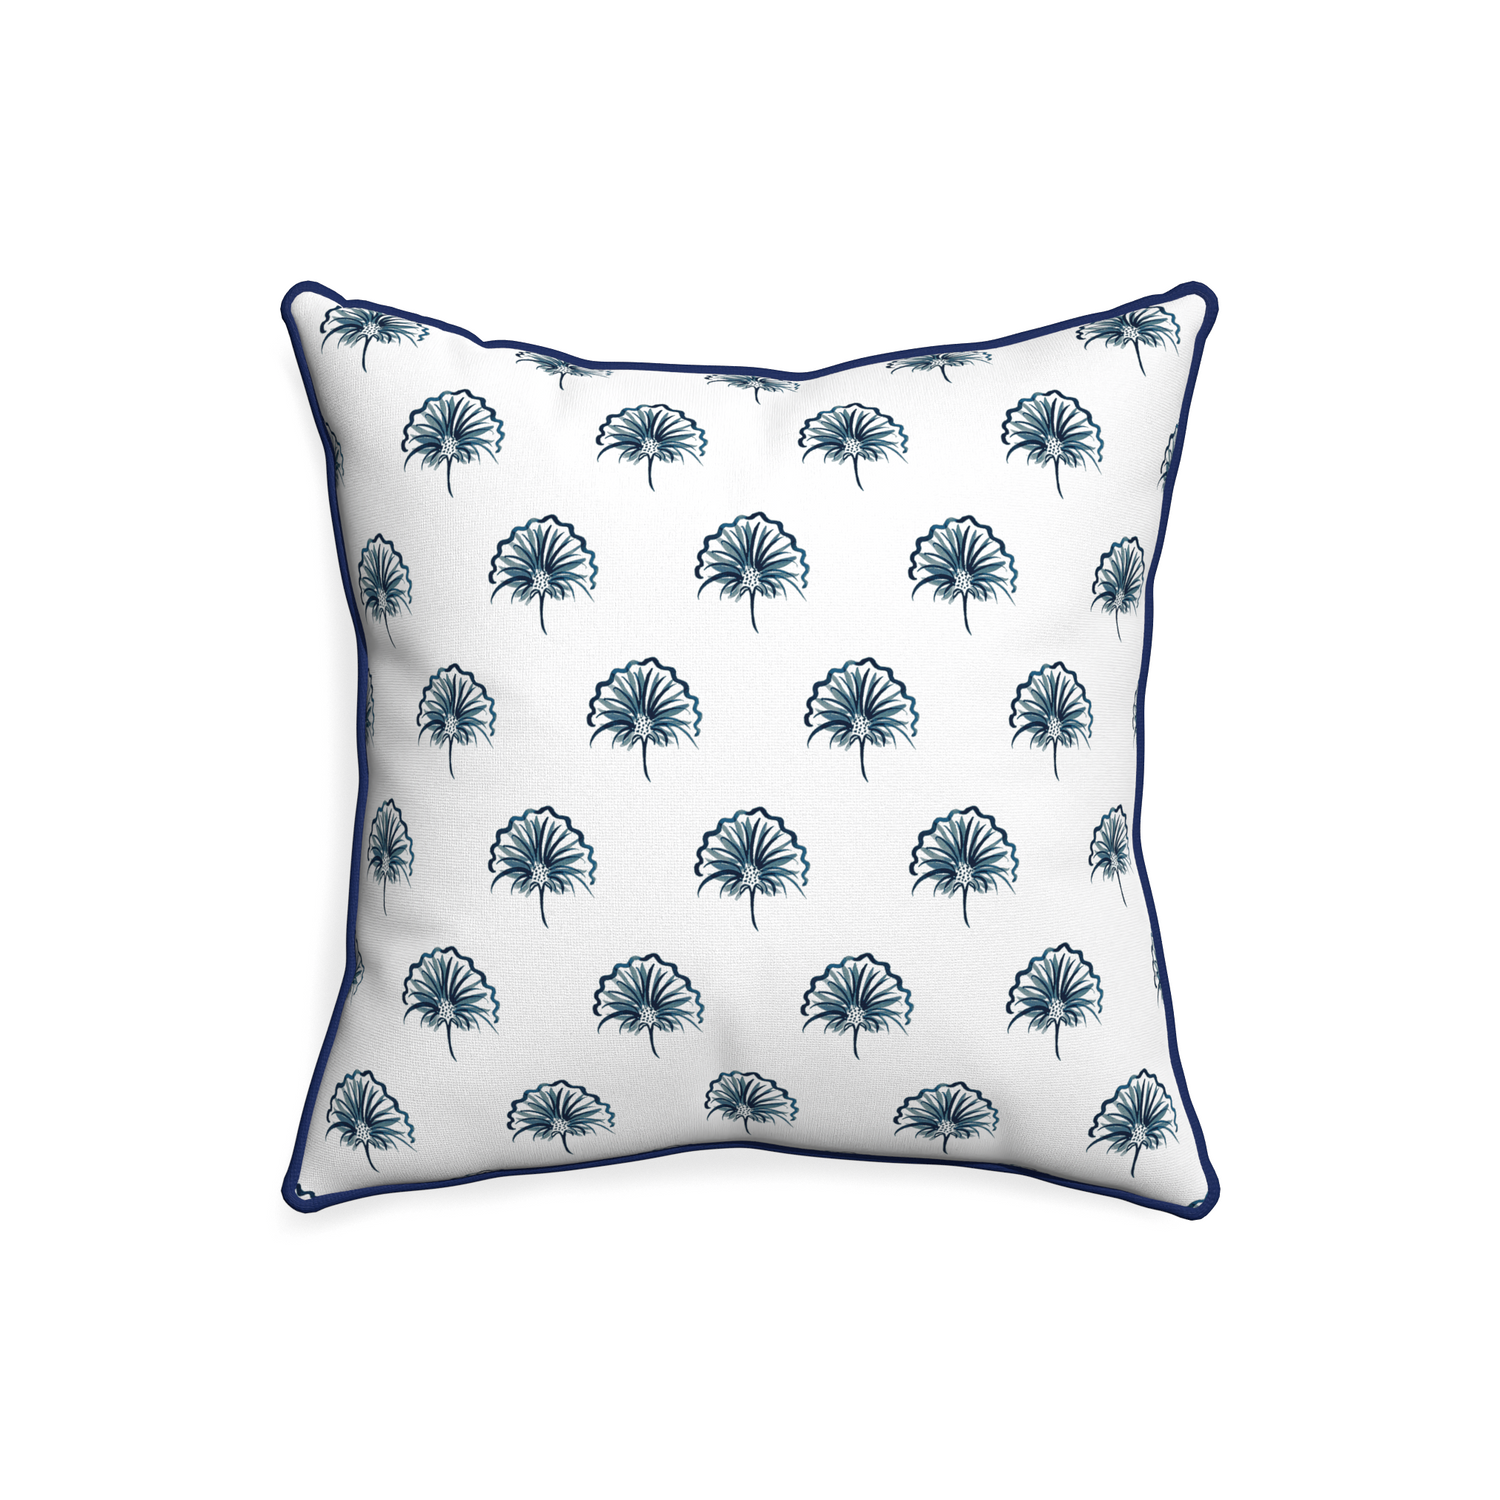 20-square penelope midnight custom floral navypillow with midnight piping on white background